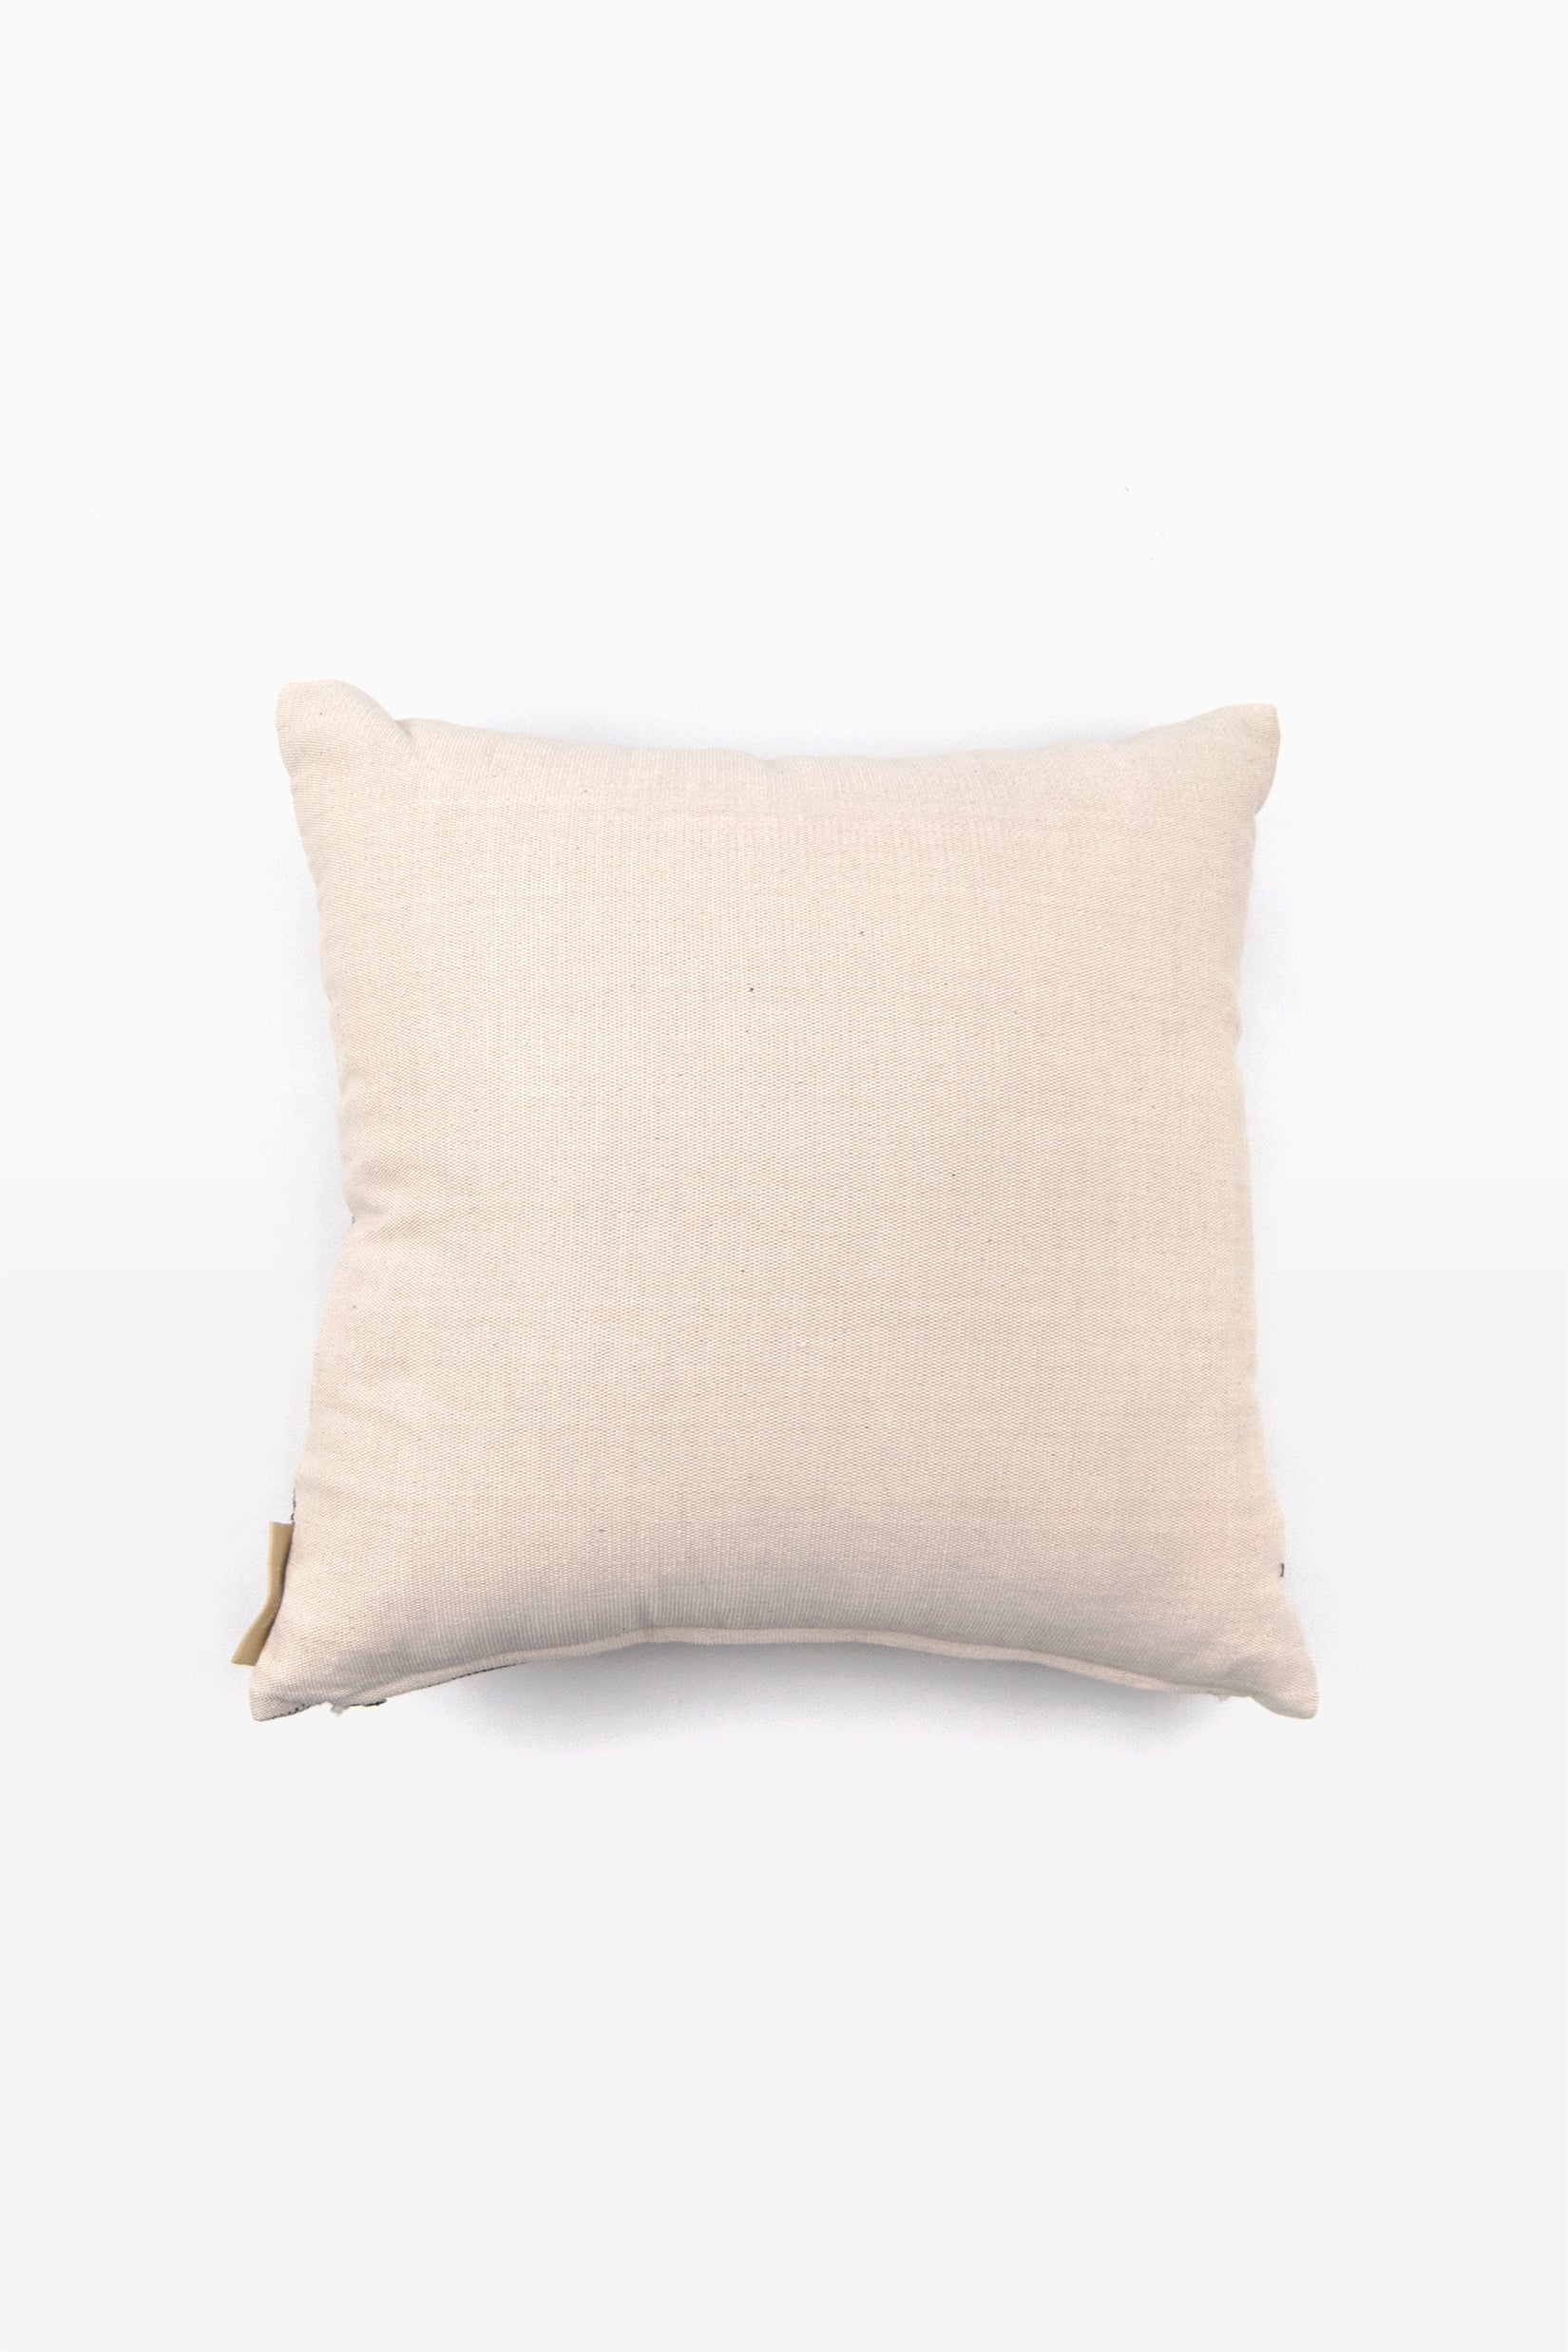 Cream-colored square pillow backing 